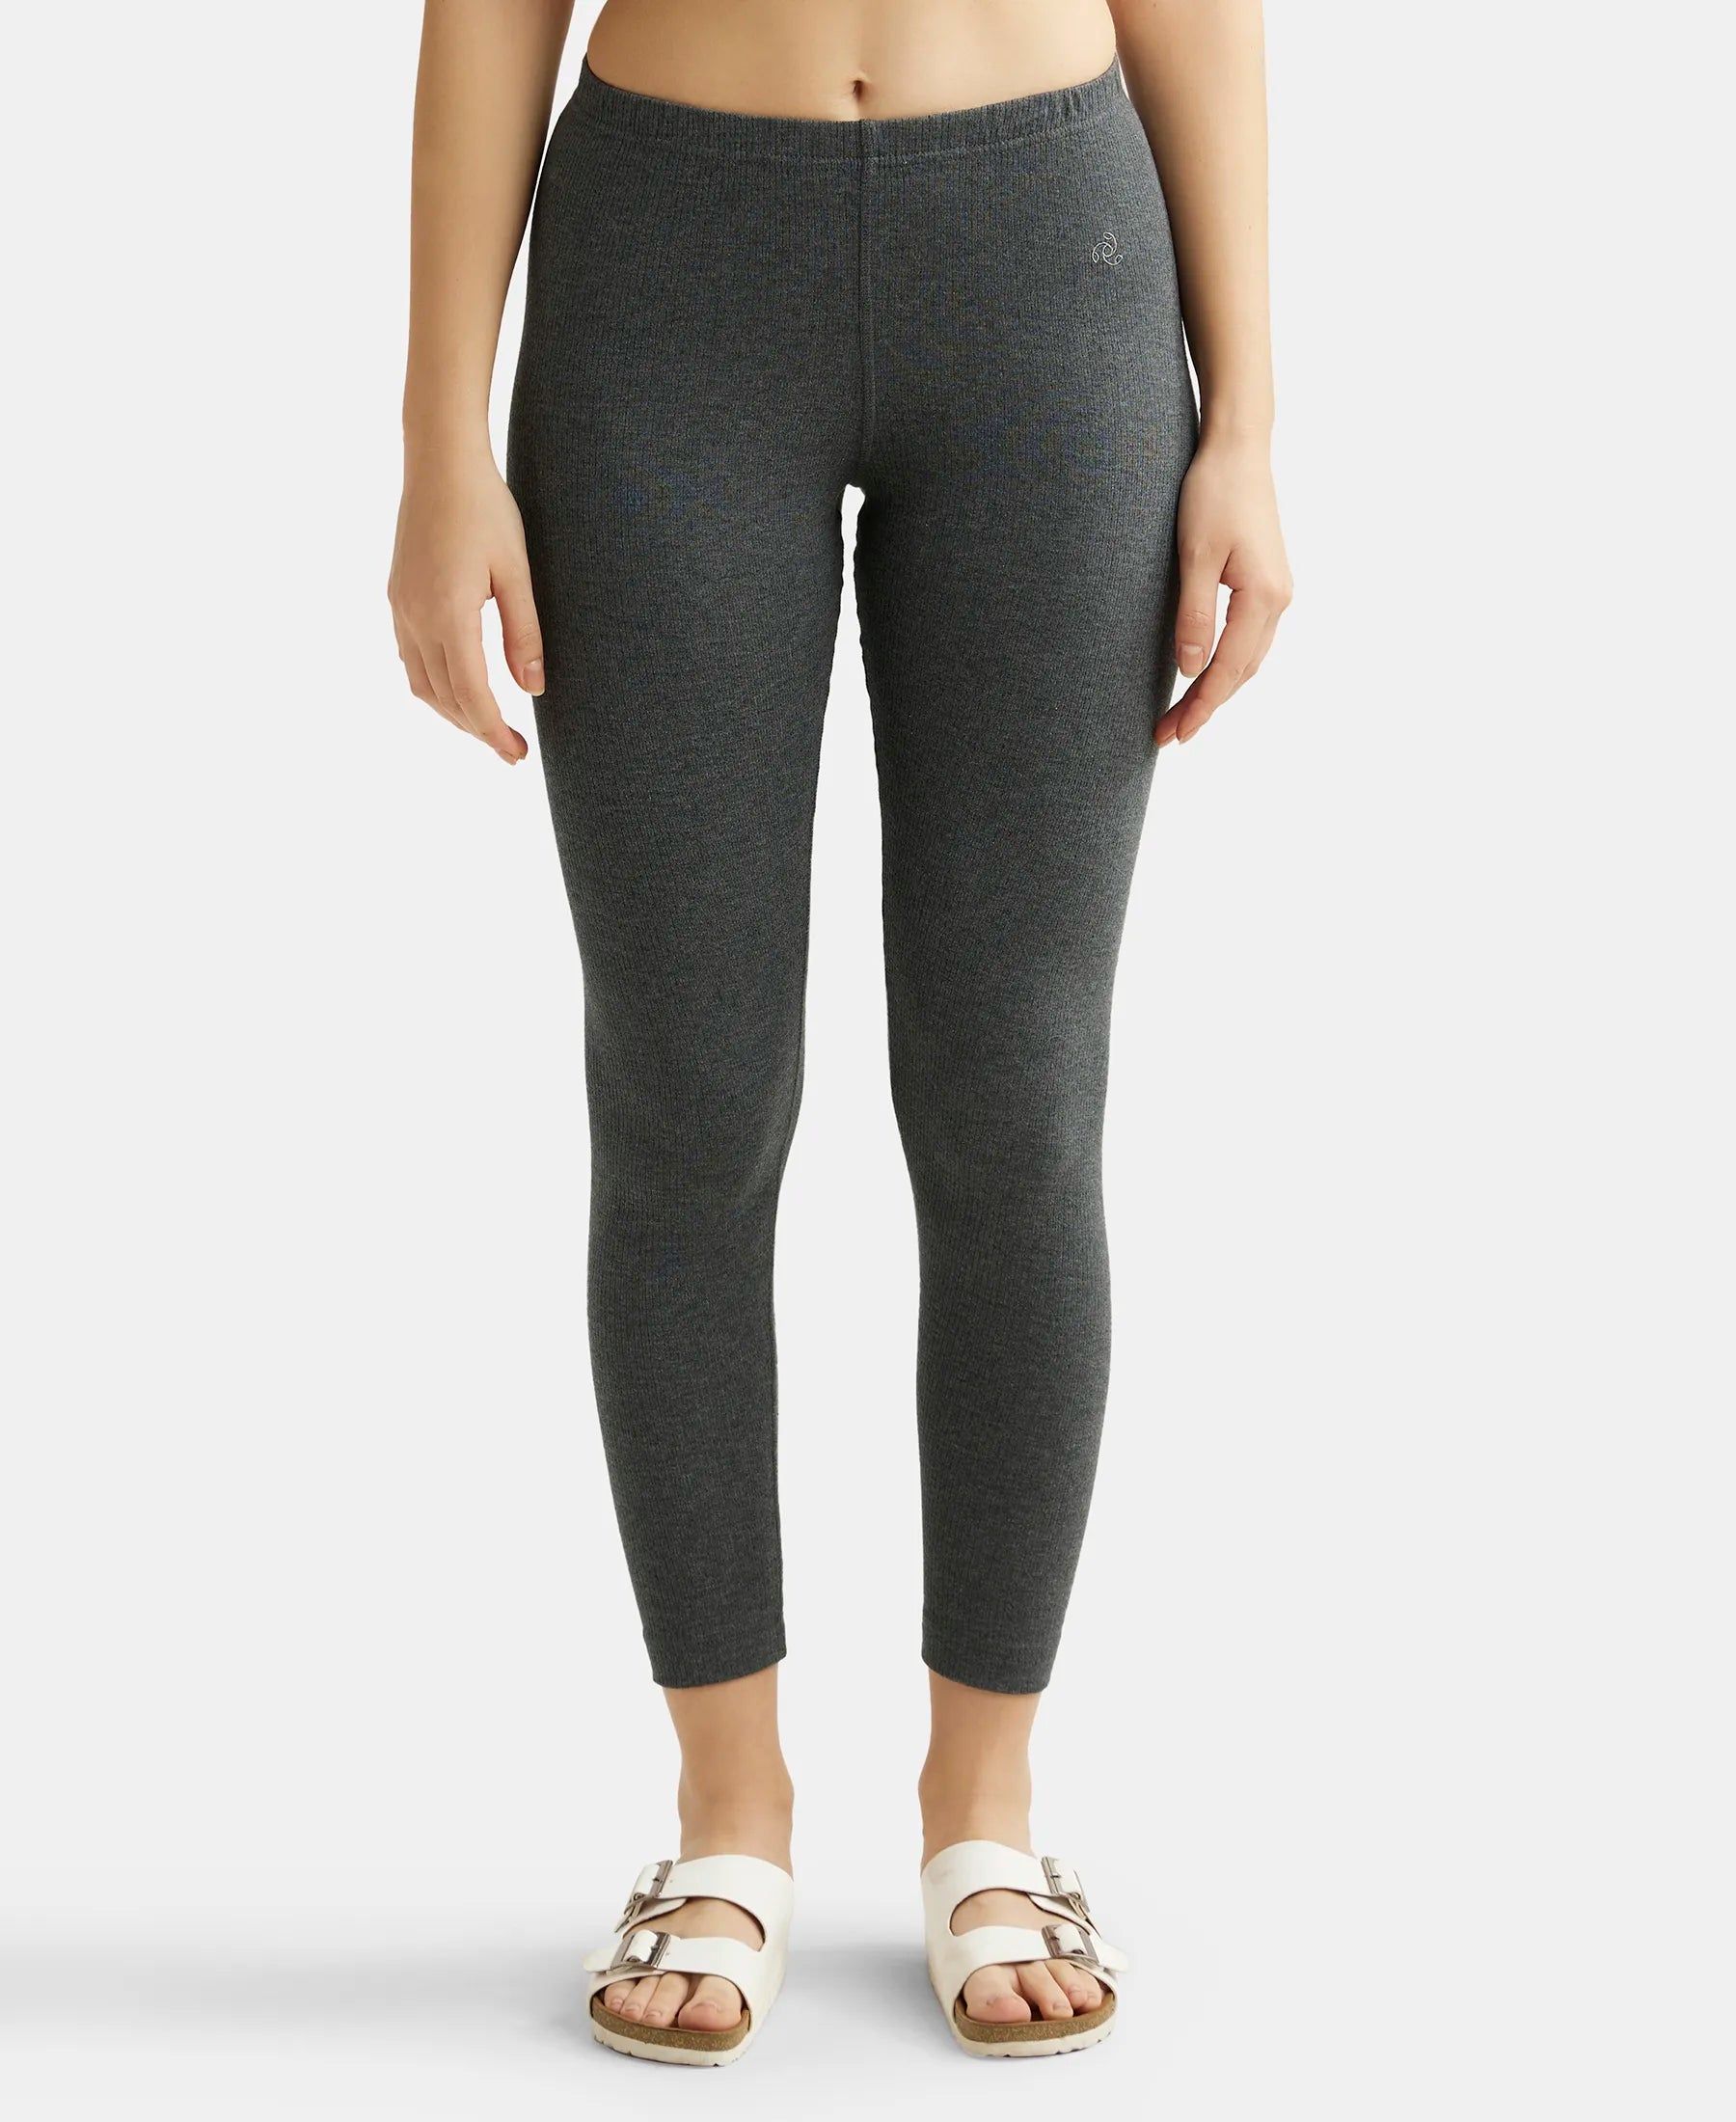 Super Combed Cotton Rich Thermal Leggings with StayWarm Technology -  Charcoal Melange